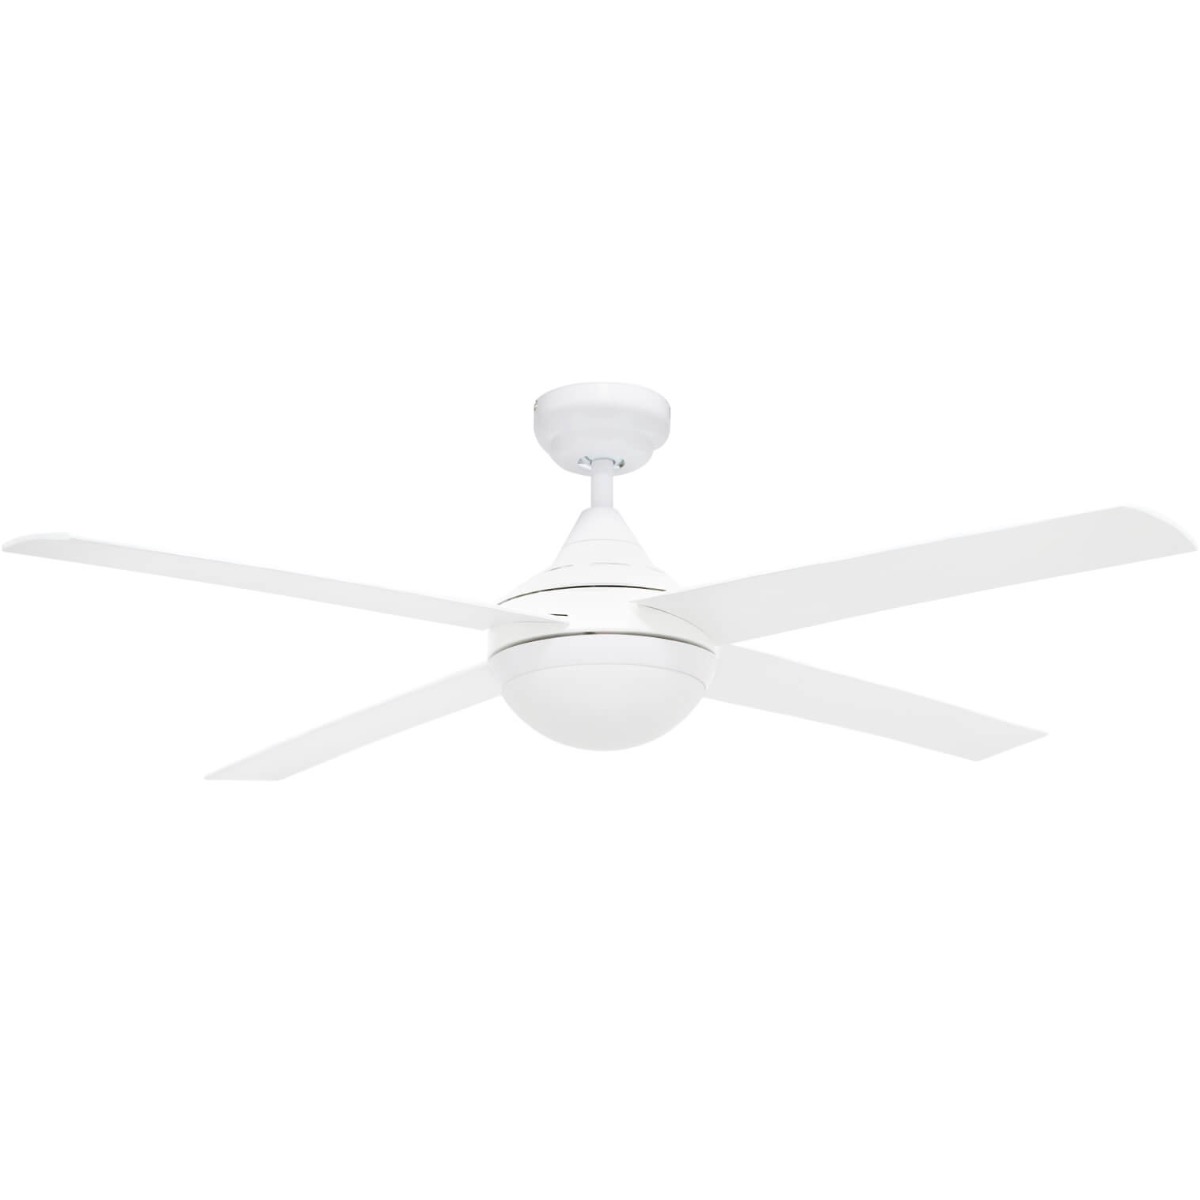 Airborne Bulimba Indoor/Outdoor ABS Blade Ceiling Fan with E27 Light - White 48"